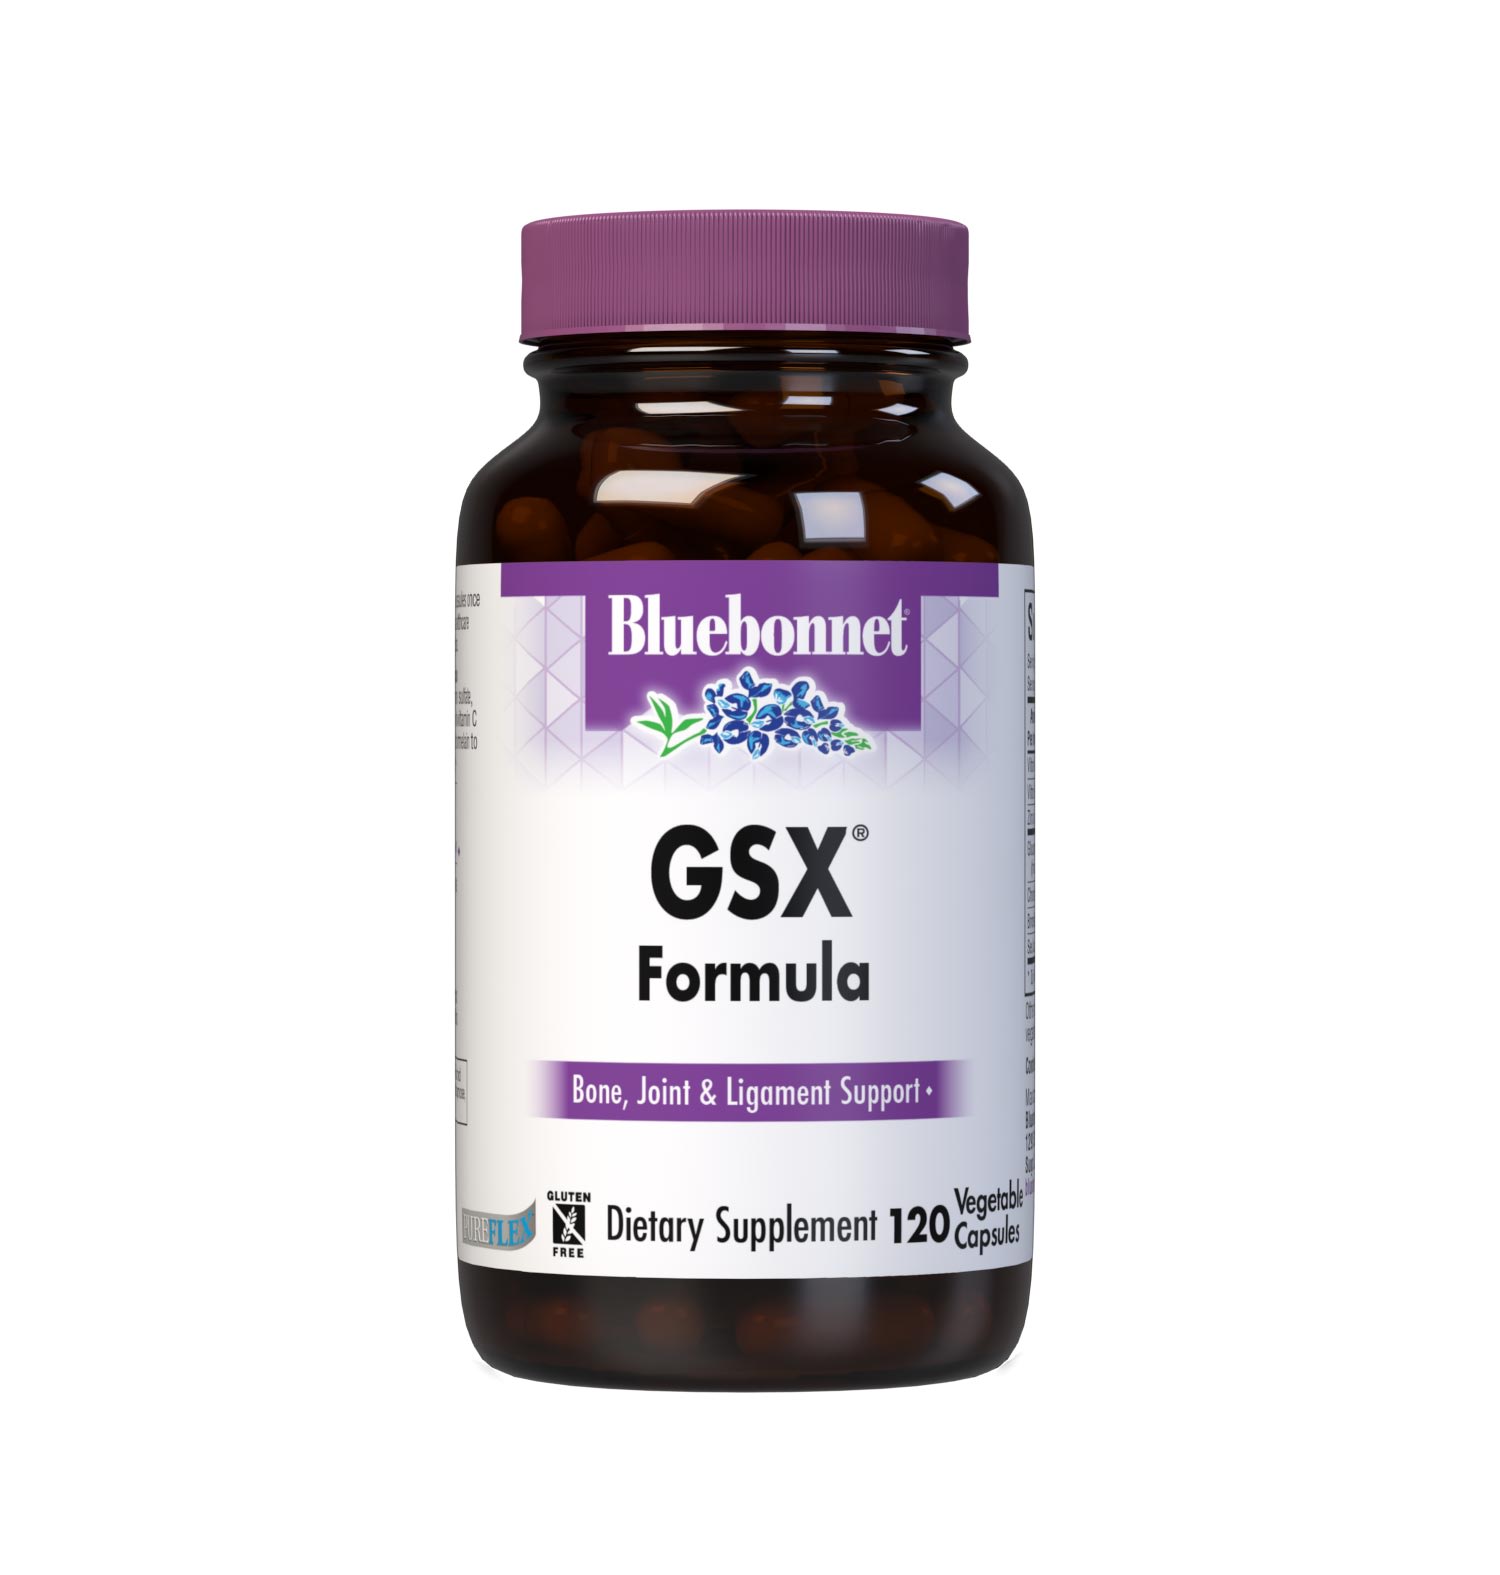 Bluebonnet’s GSX® Formula Vegetable Capsules are formulated with a combination of glucosamine sulfate, chondritin sulfate, and sea cucumber along with vitamin C and B6, zinc picolinate, and pineapple sourced bromelain to help support bone, joint and ligament health. #size_120 count